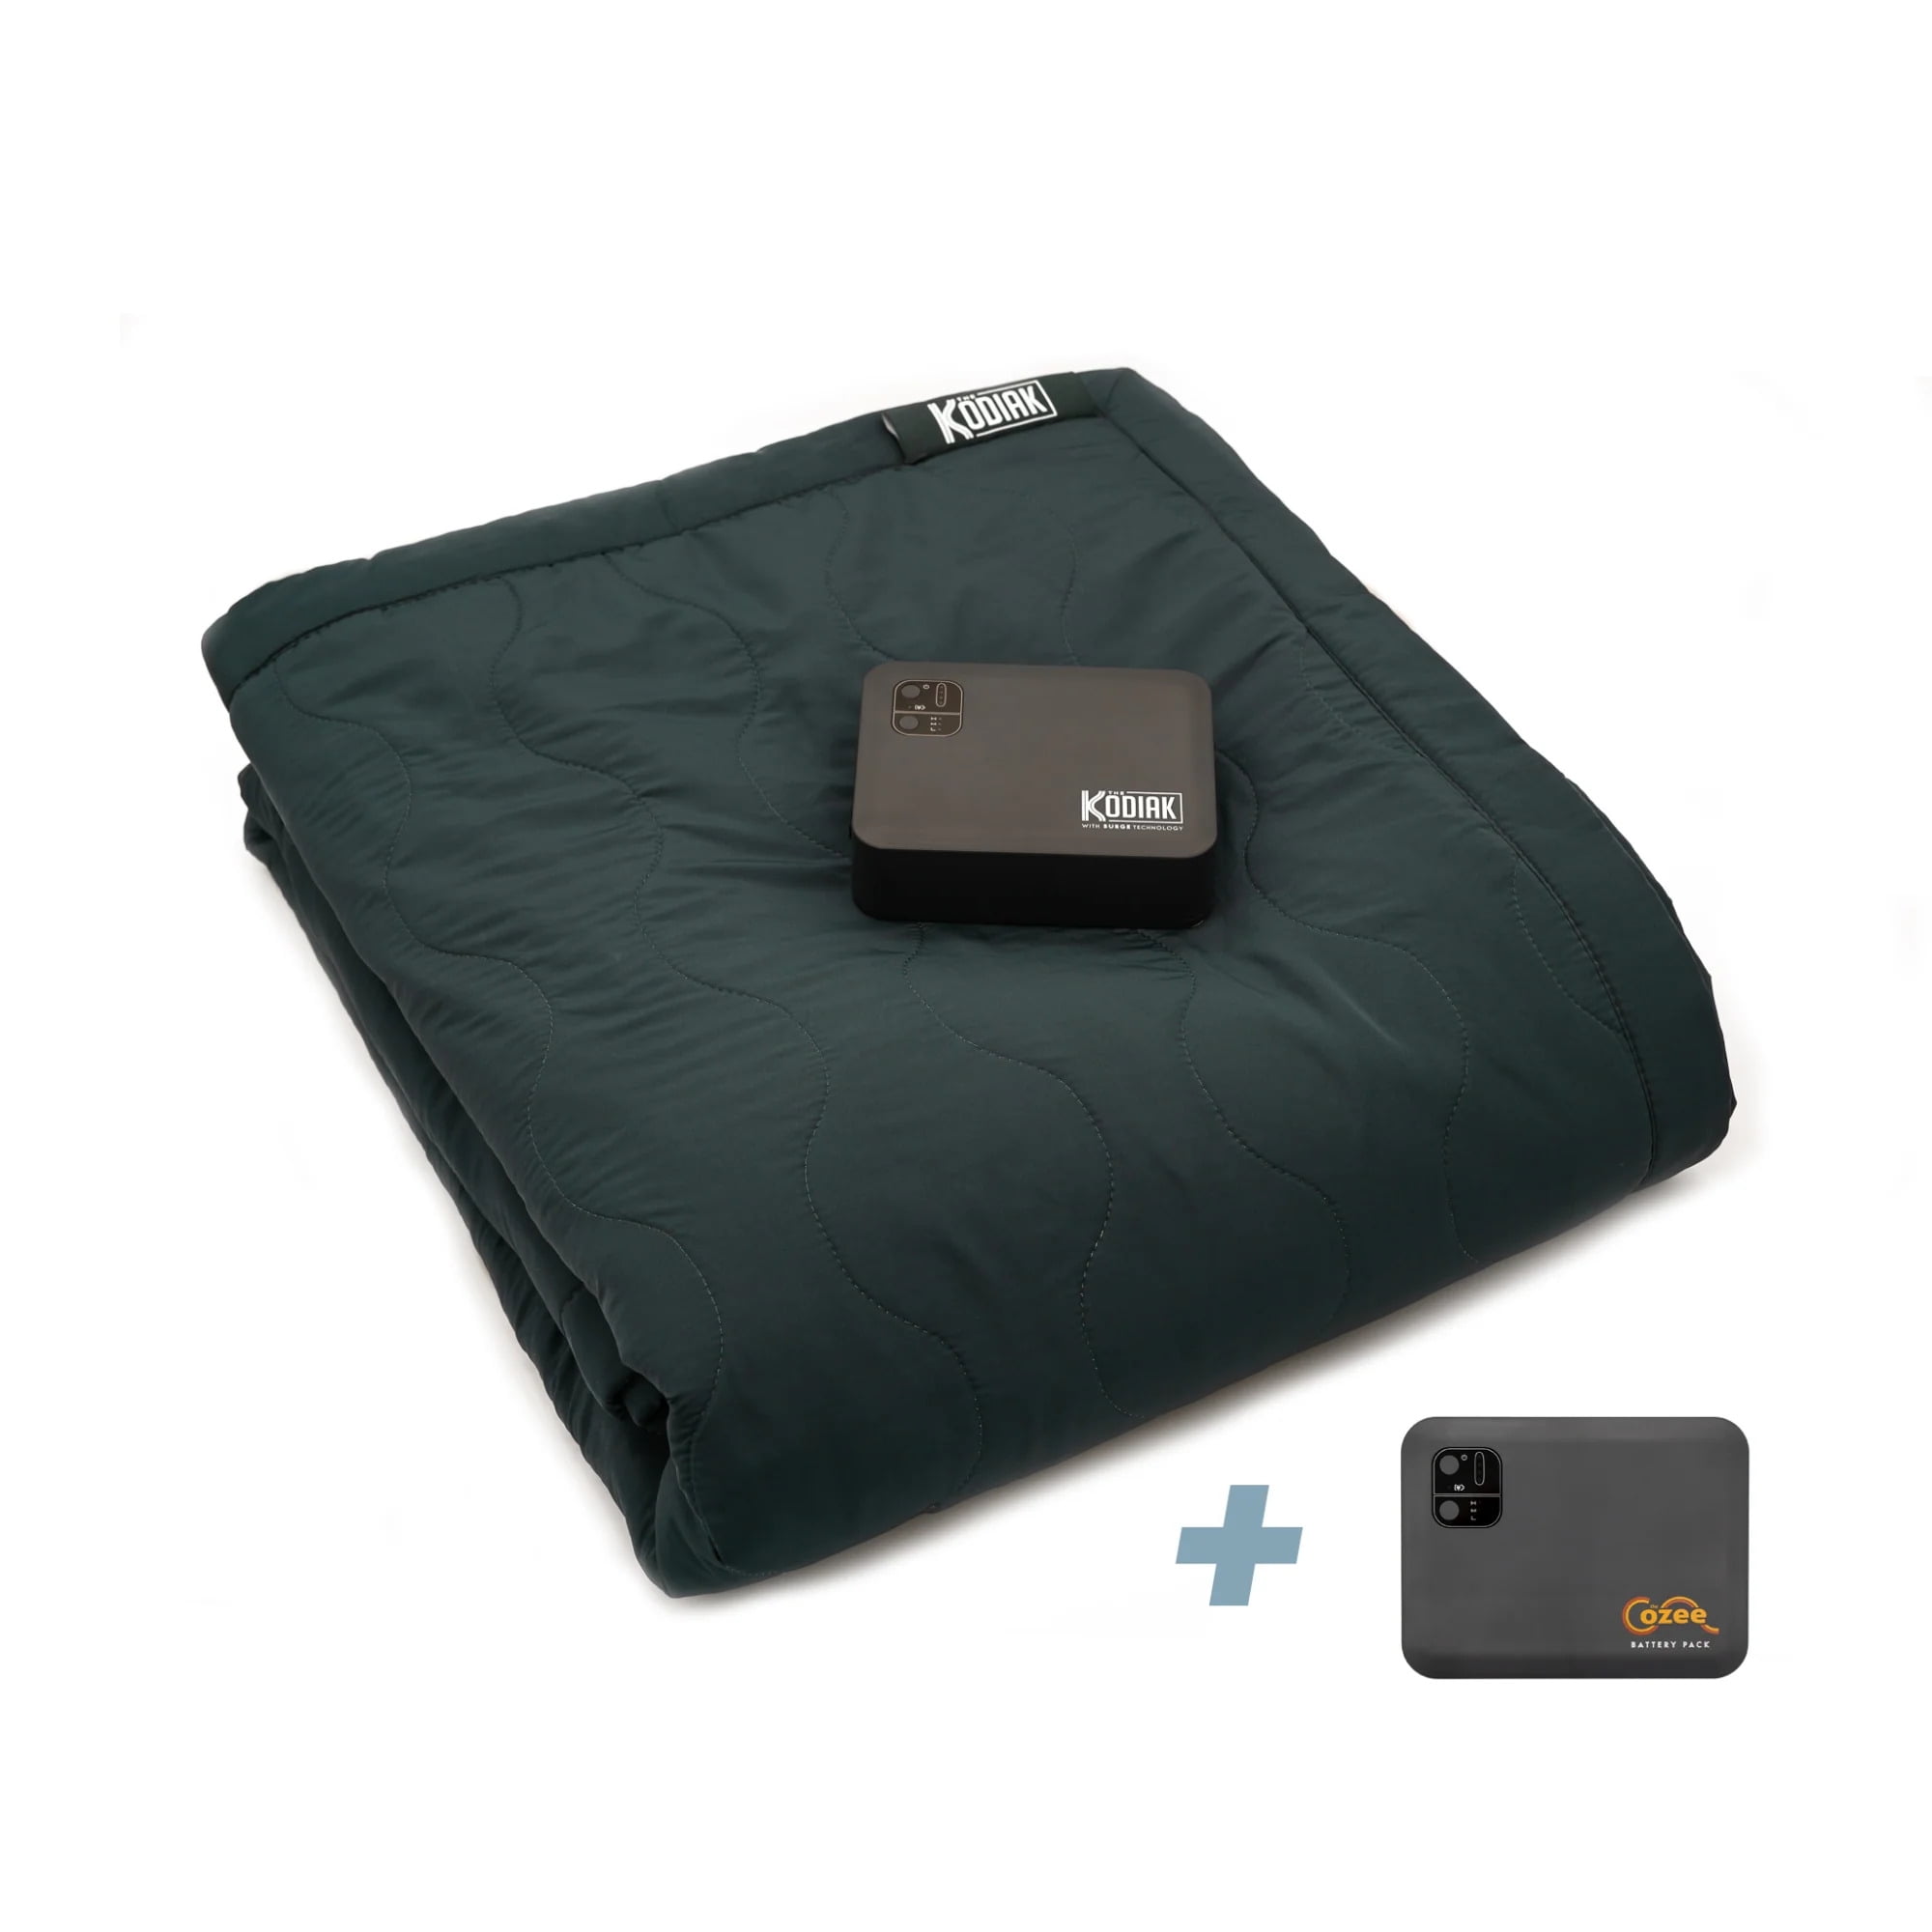 Portable Heated Blanket Battery Operated, 60 x 40 USB Battery Heated Blanket for Outdoors and Camping, 40W 27000mAh Heating Blanket with 5 Heating